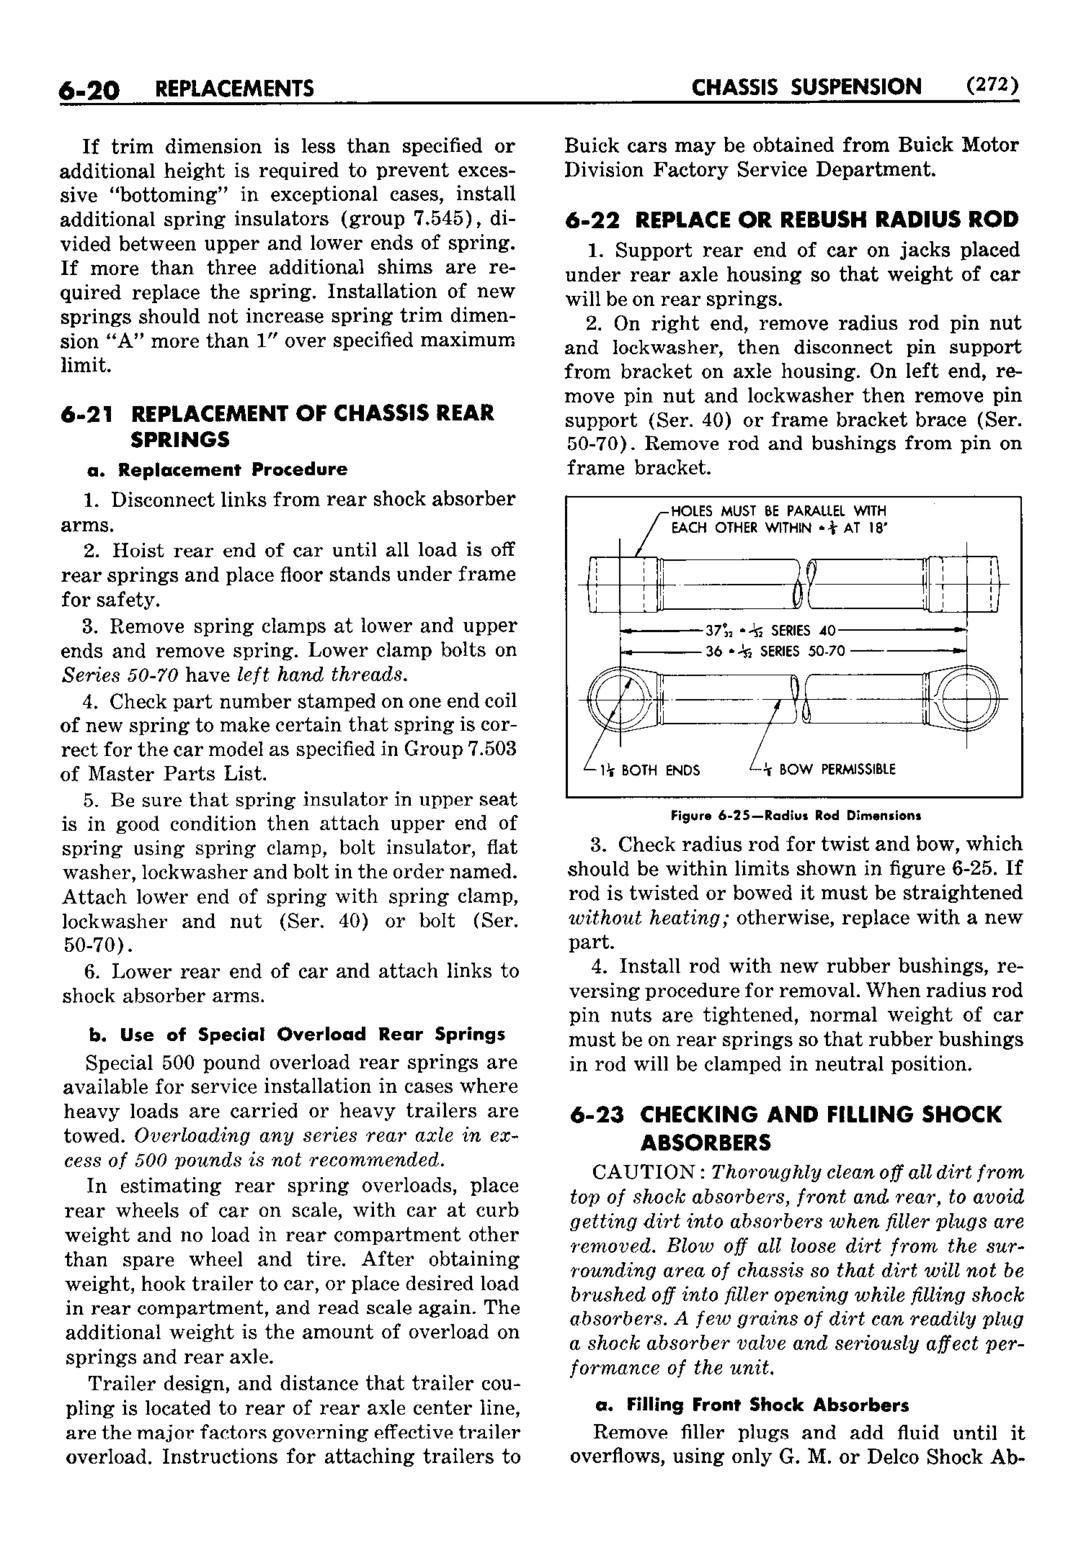 n_07 1952 Buick Shop Manual - Chassis Suspension-020-020.jpg